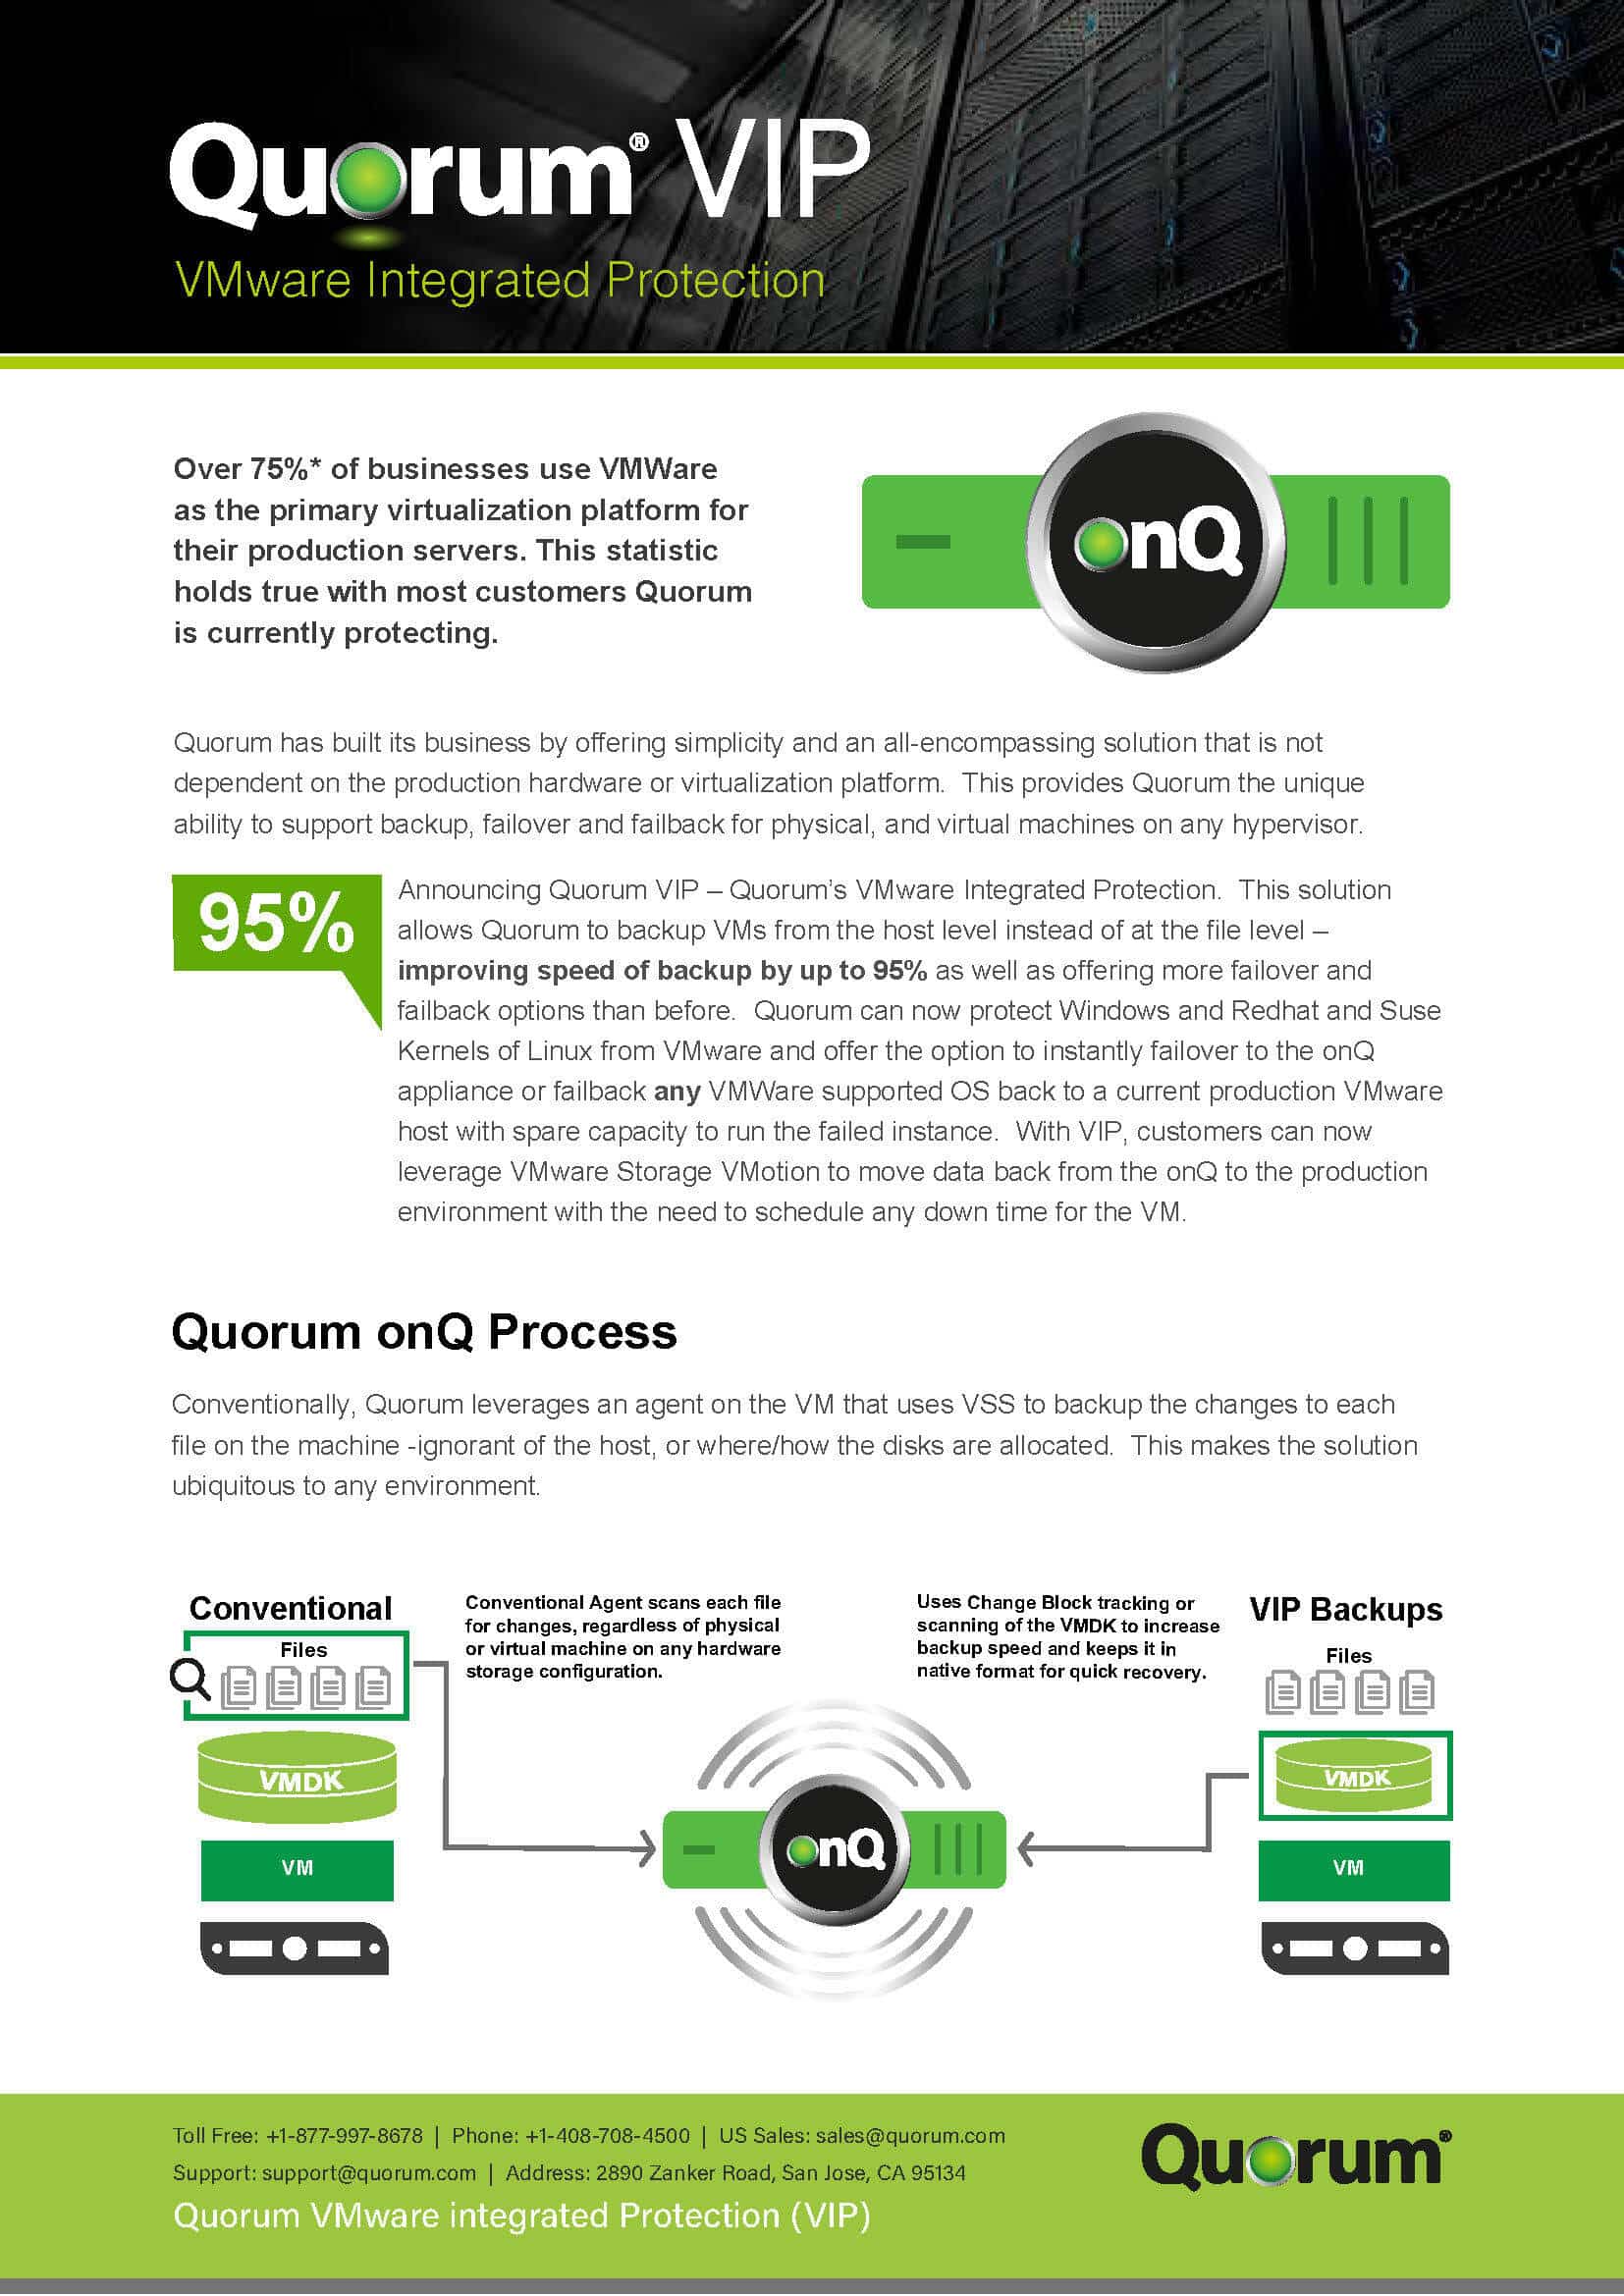 Advertisement for Quorum VIP - VMware Integrated Protection. Features include over 75% customers using VMware, up to 95% backup cost savings, and onQ Process Overview. Includes product screenshots, icons, and contact details. Green and black color scheme, Quorum logo at top.